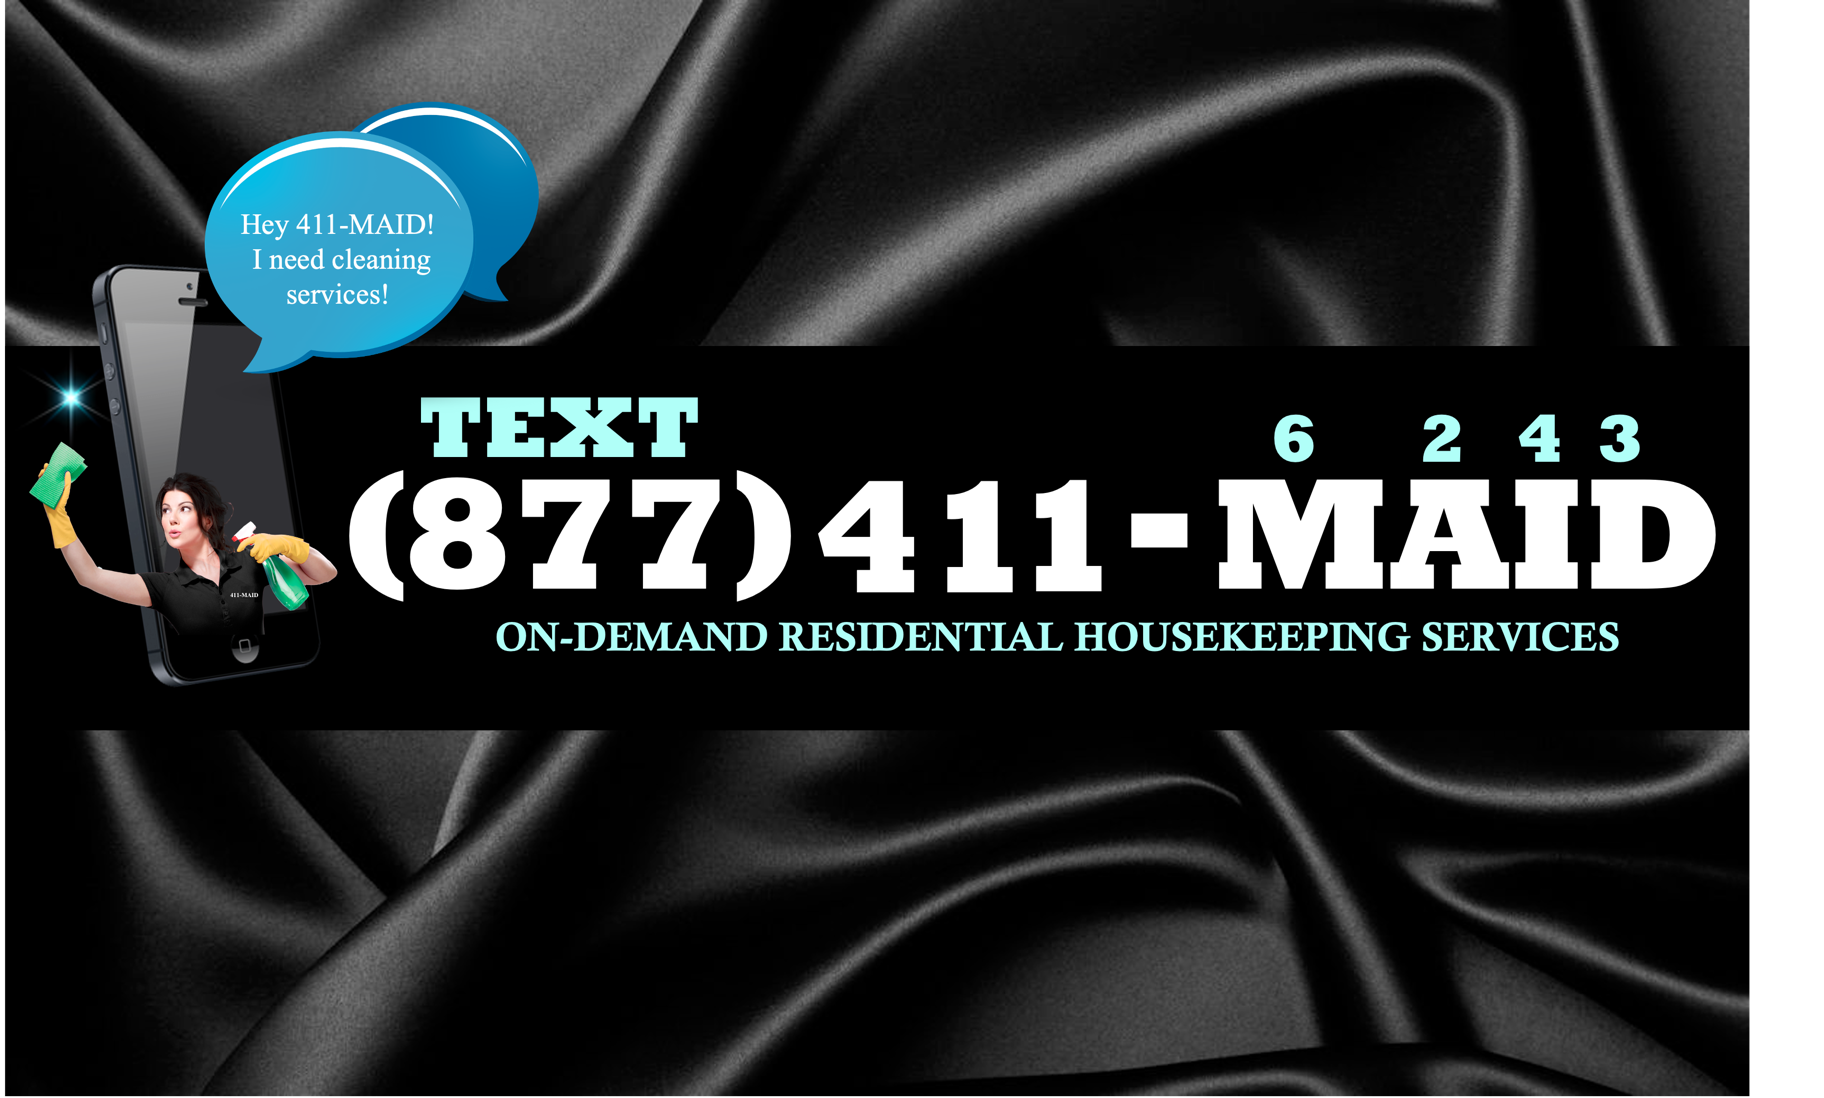 411-MAID Residential and Vacation Rental Cleaning Flyer and Promotion